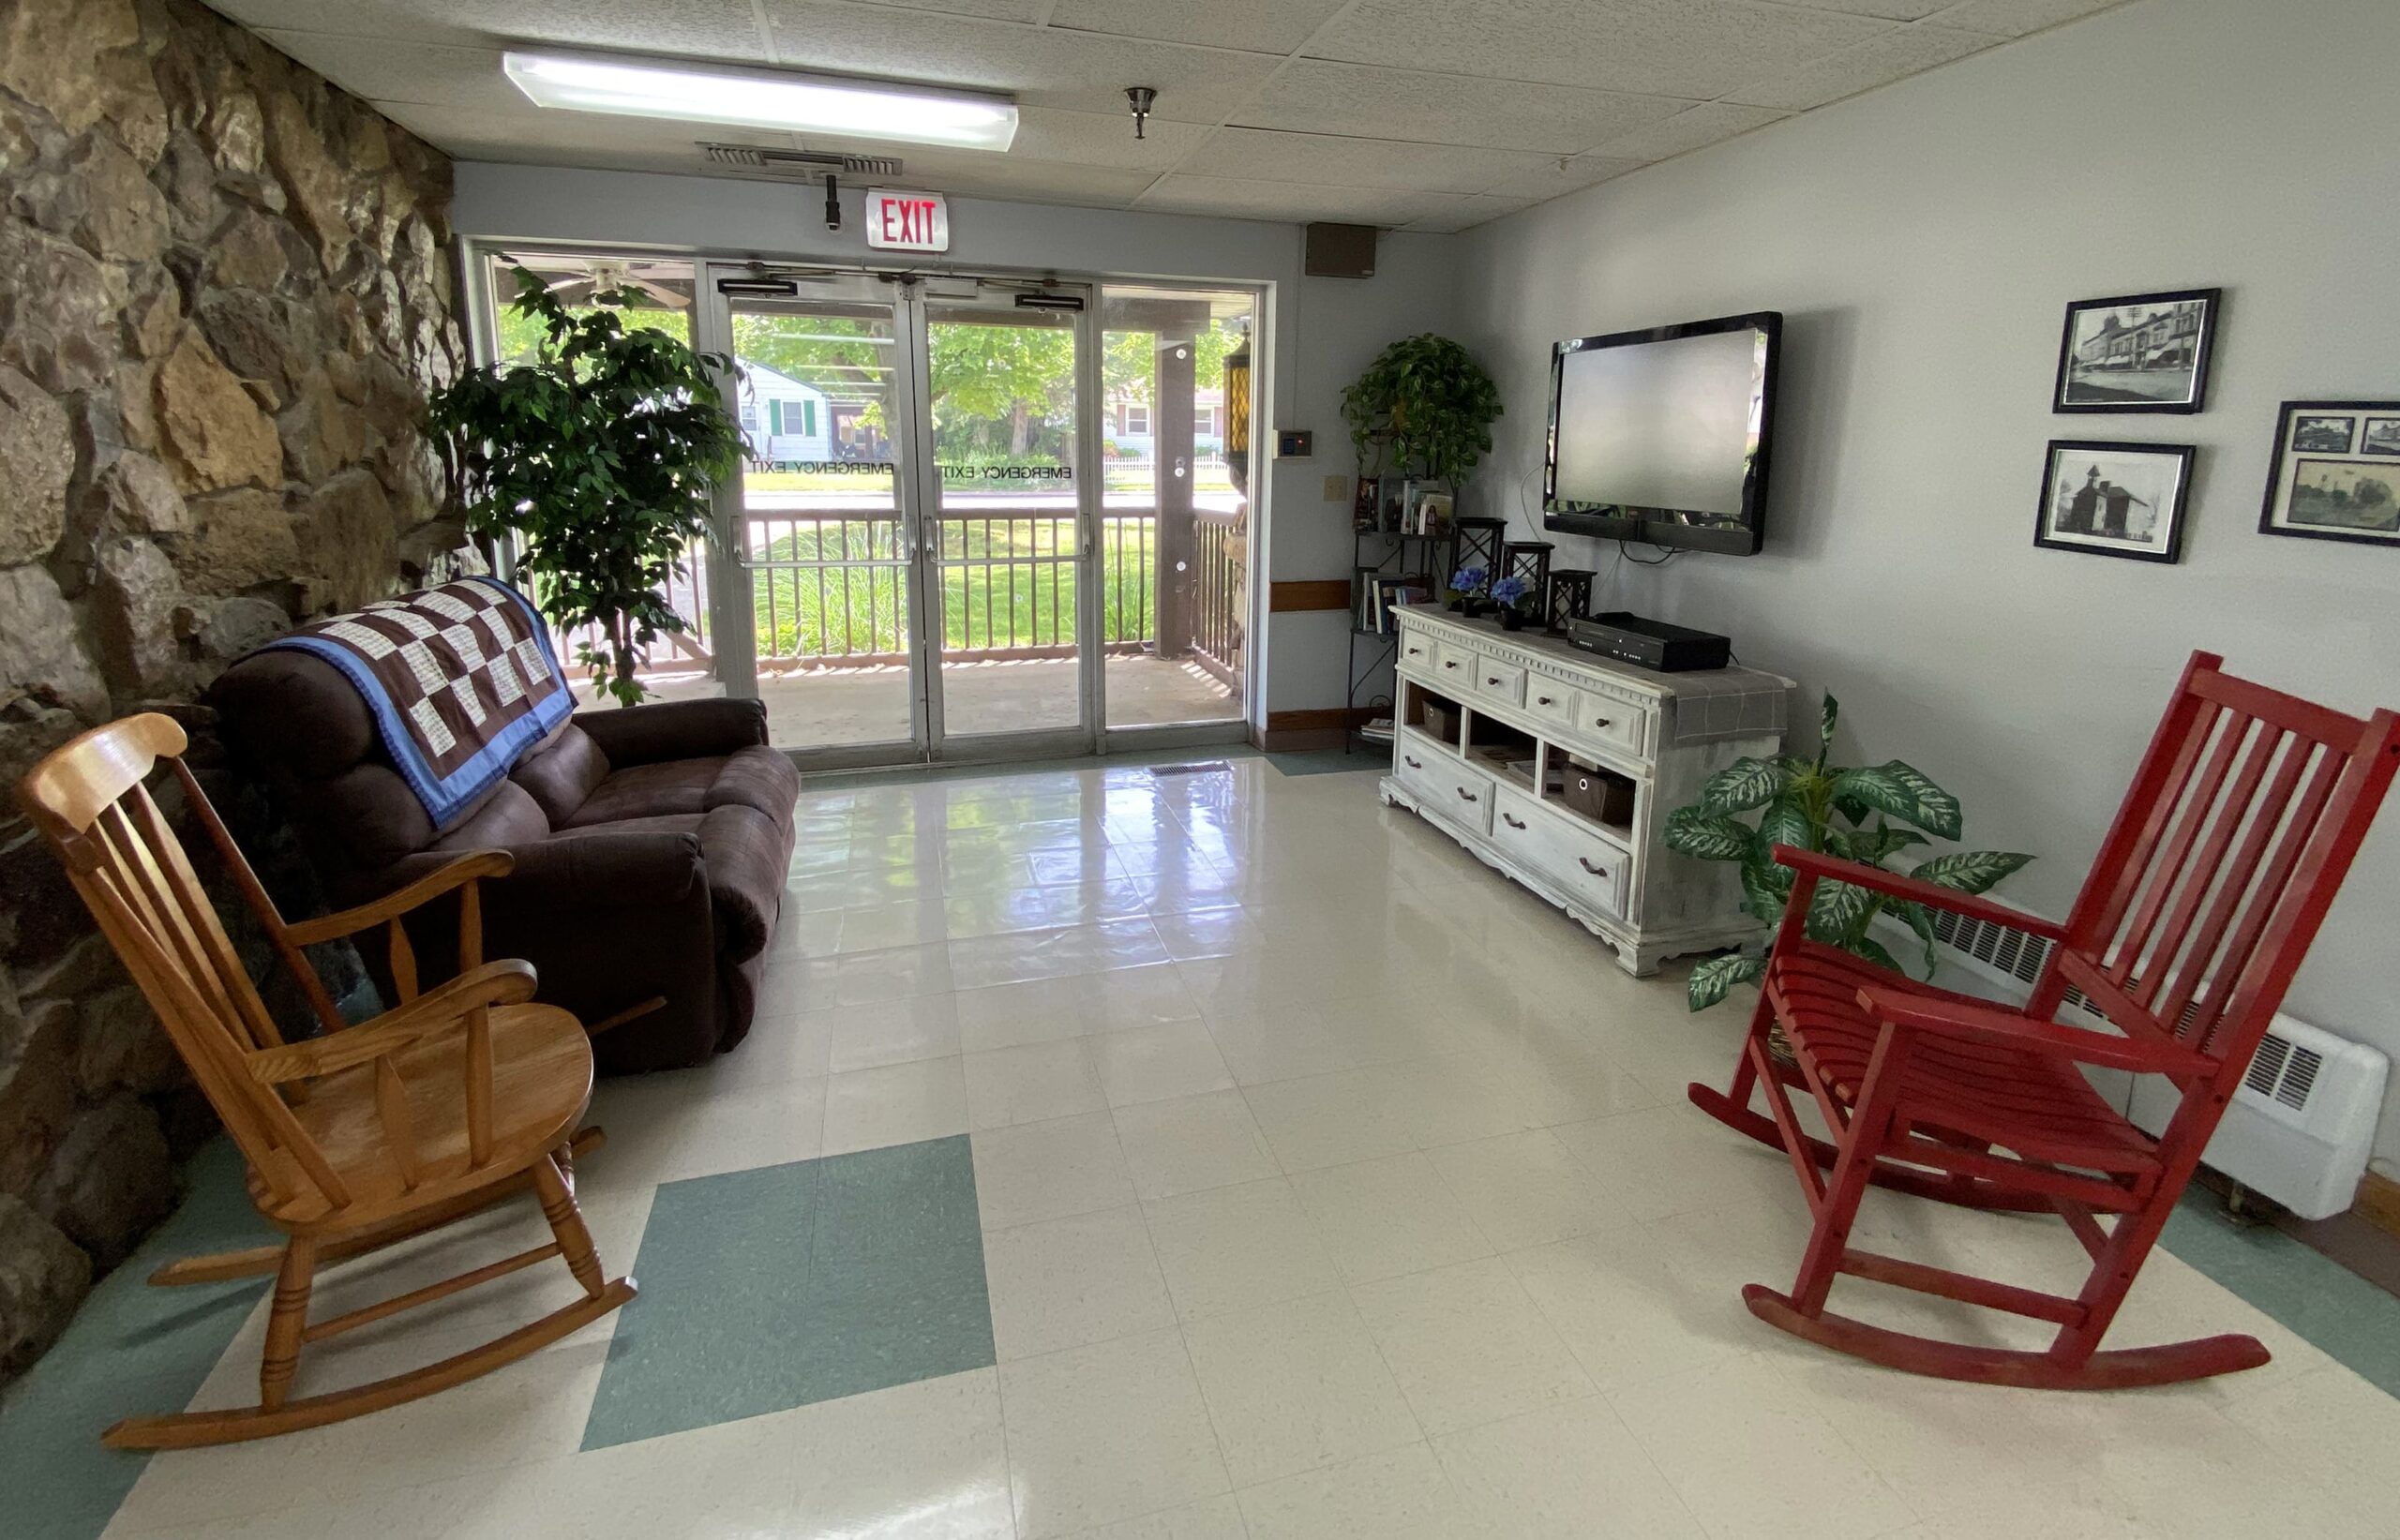 Brickyard Healthcare LaPorte Care Center sitting area with TV and rocking chairs